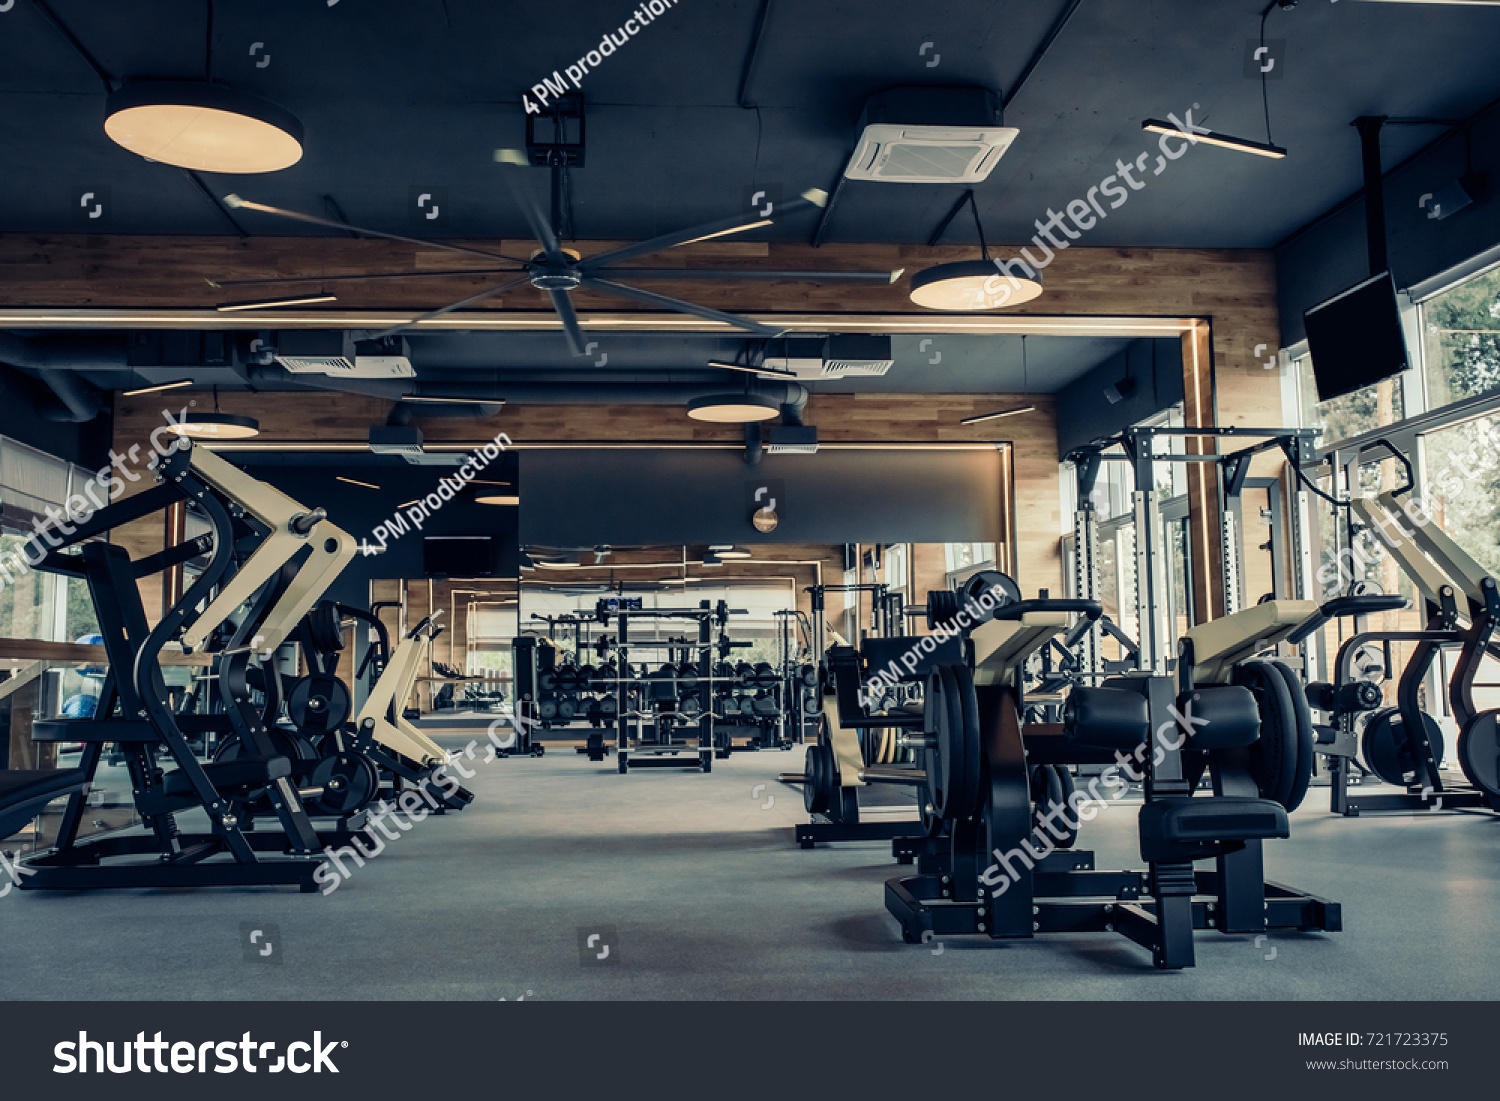 Modern light gym. Sports equipment in gym. Barbells of different weight on rack. #721723375